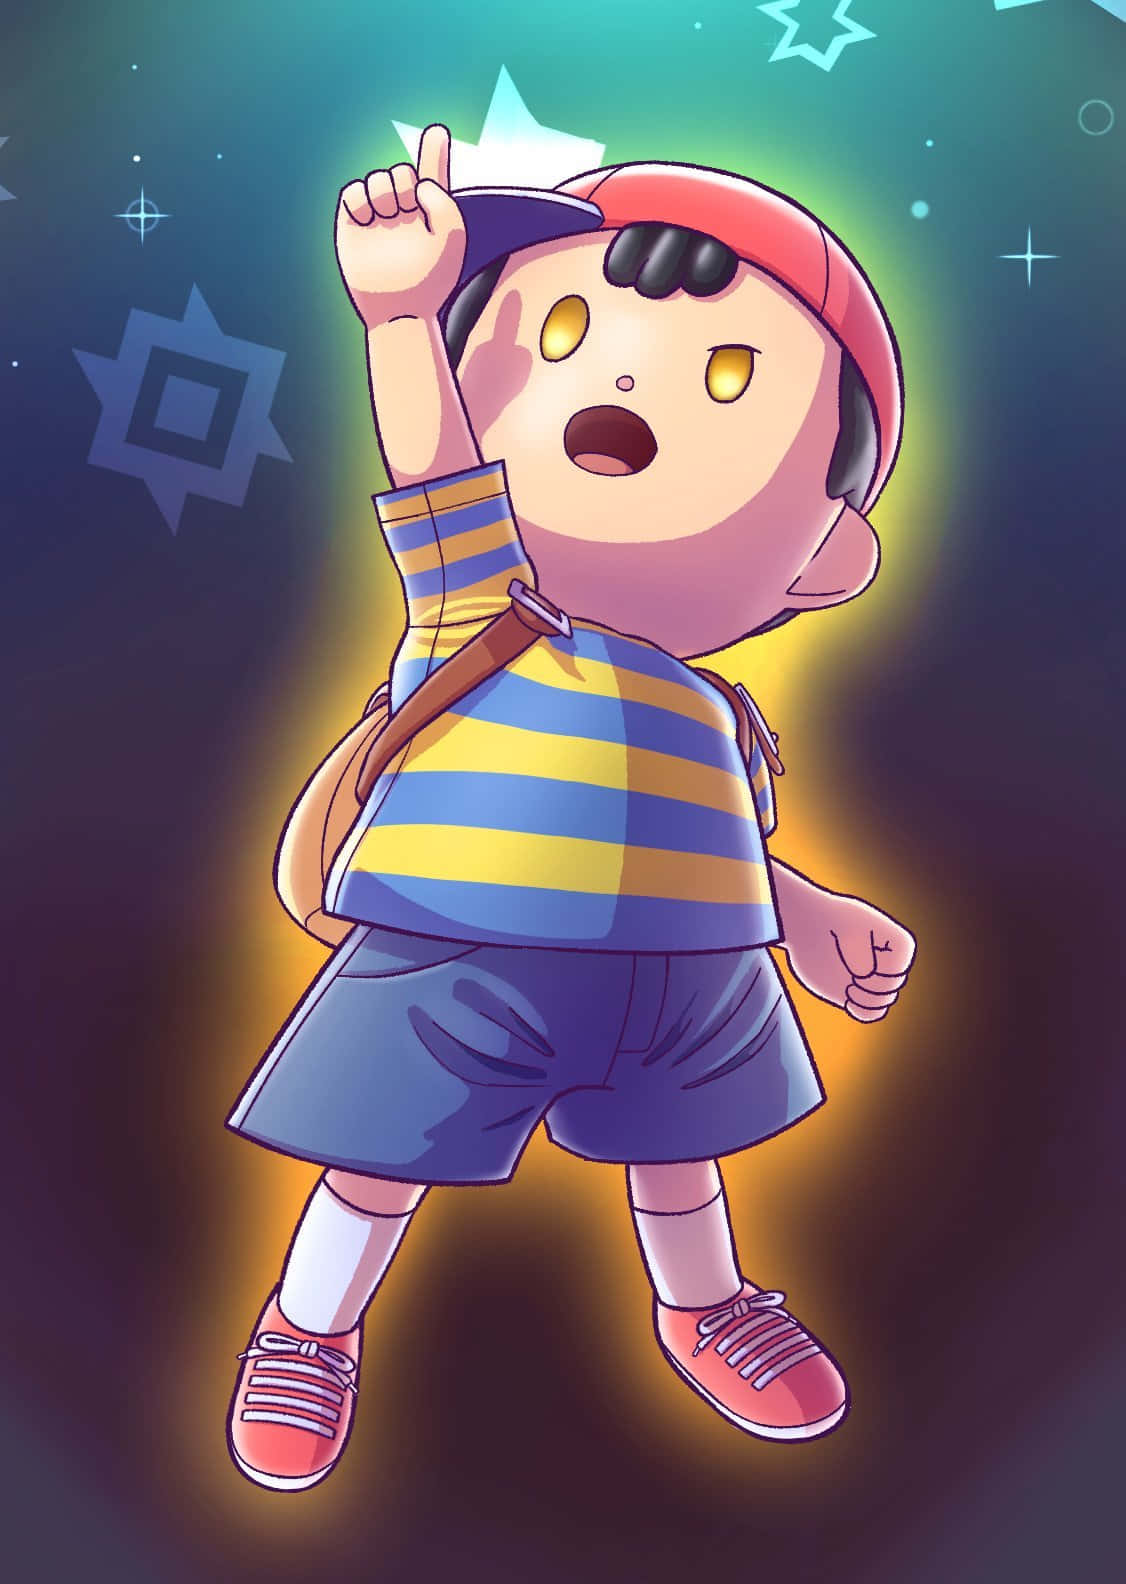 An epic adventure awaits in the magical world of Earthbound